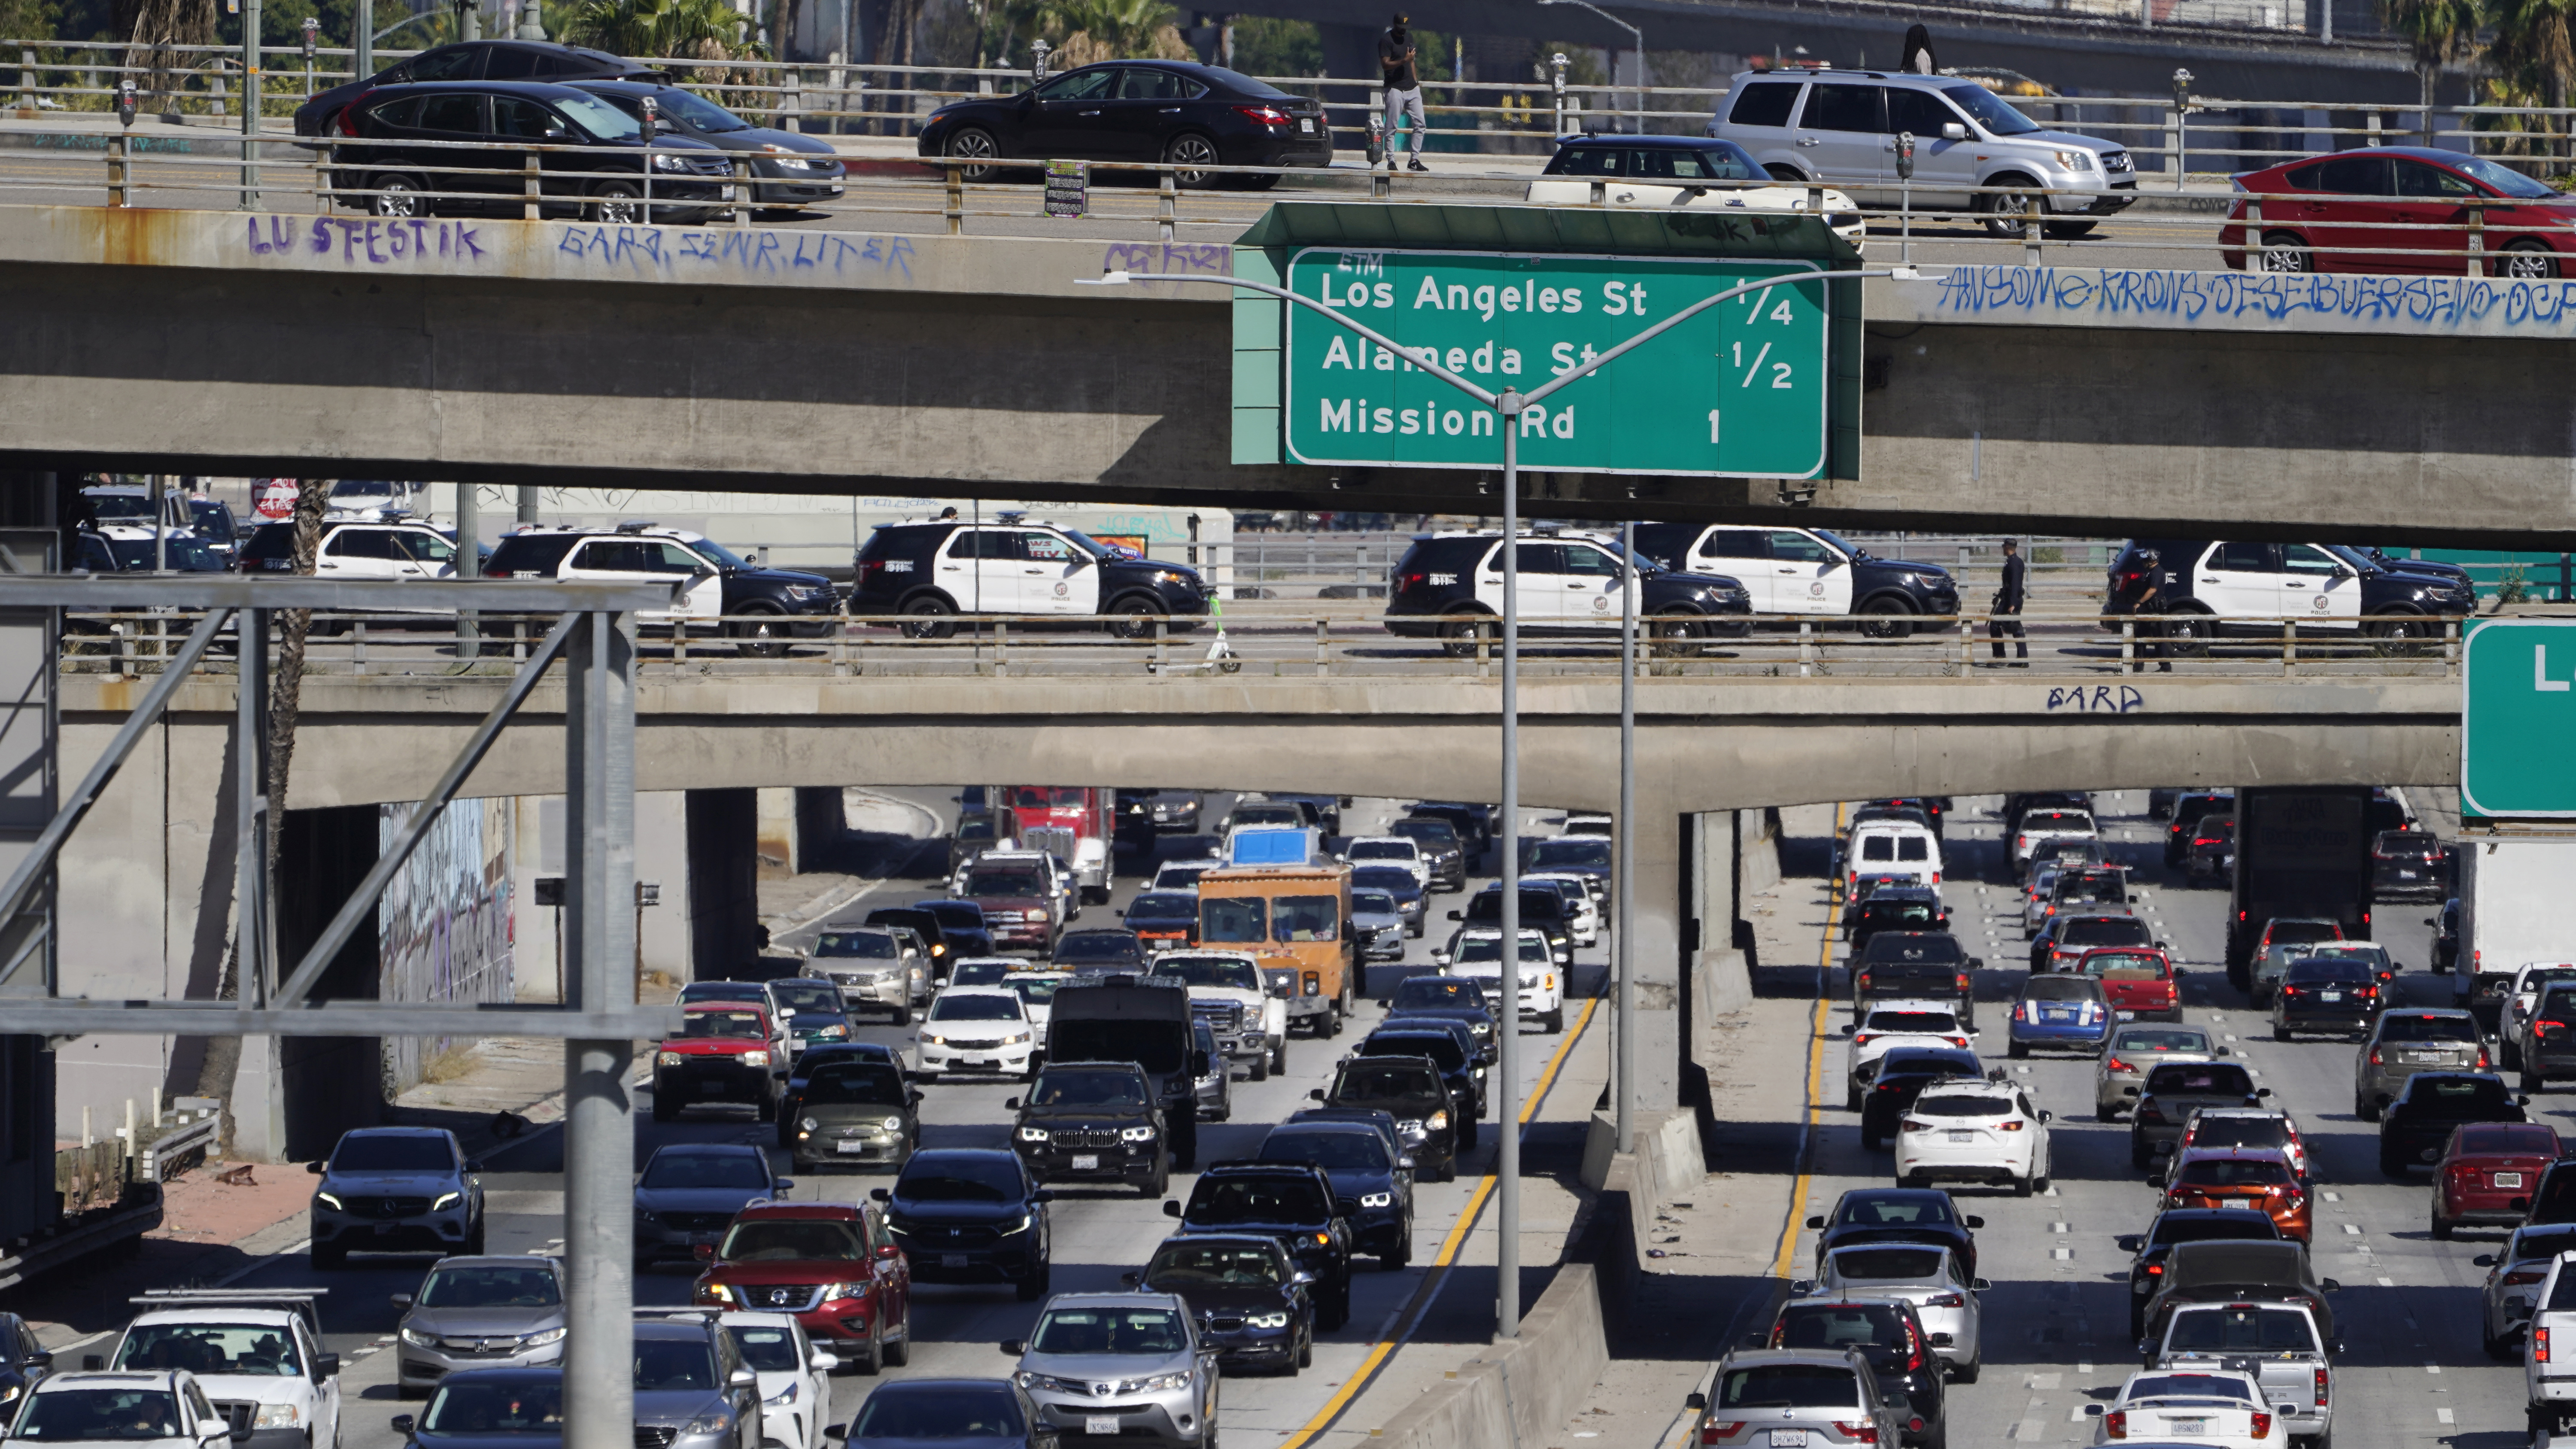 Motorists stand still as supporters of abortion rights briefly blocked traffic on the Hollywood Freeway U.S. 101 in downtown Los Angeles.